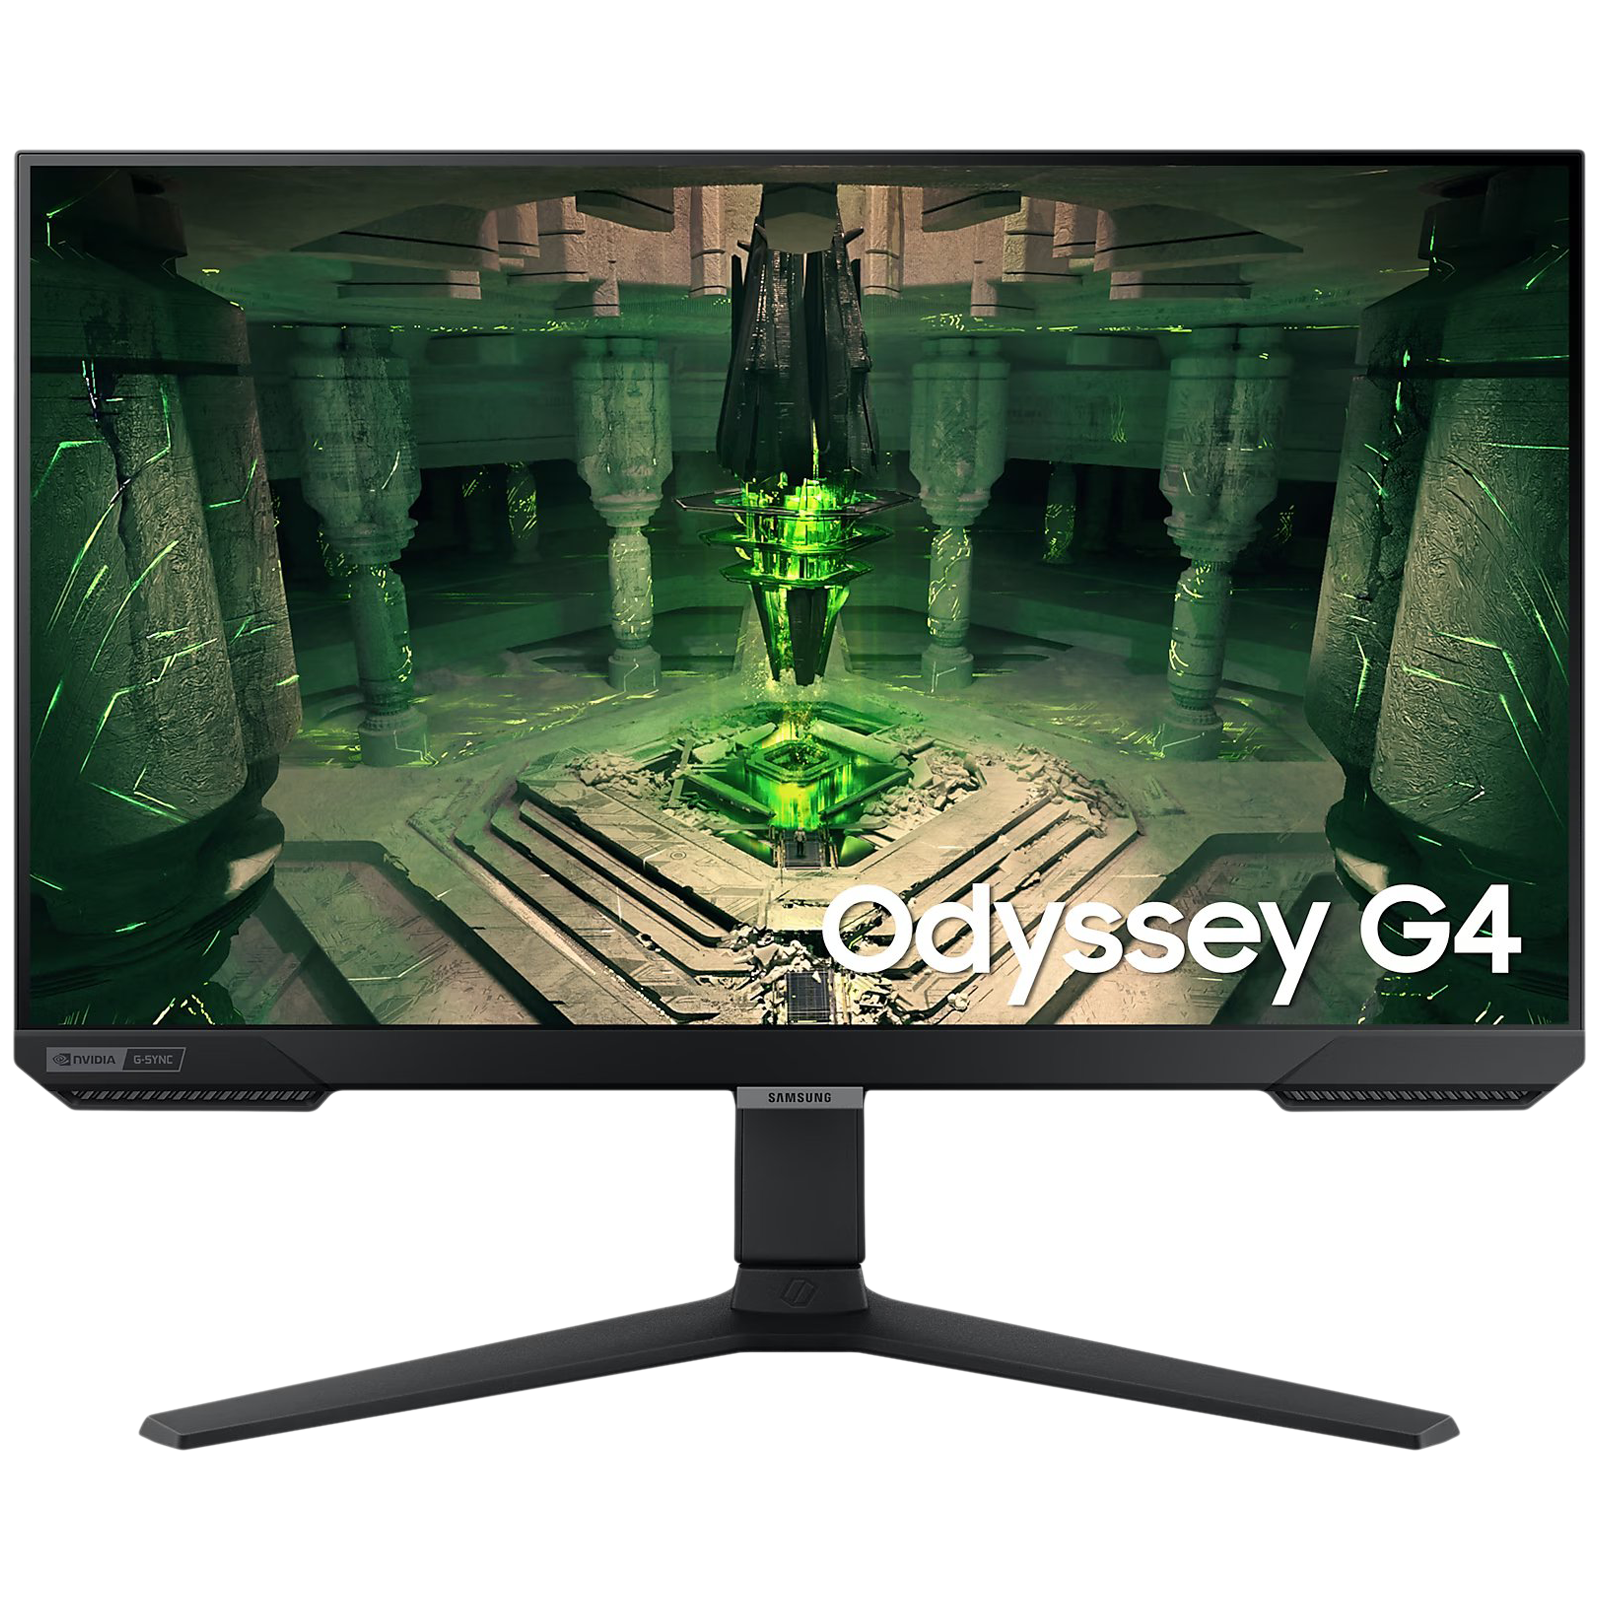 SAMSUNG Odyssey G4 63.5 cm (25 inch) Full HD IPS Panel Height Adjustable Gaming Monitor with AMD Free Sync Premium